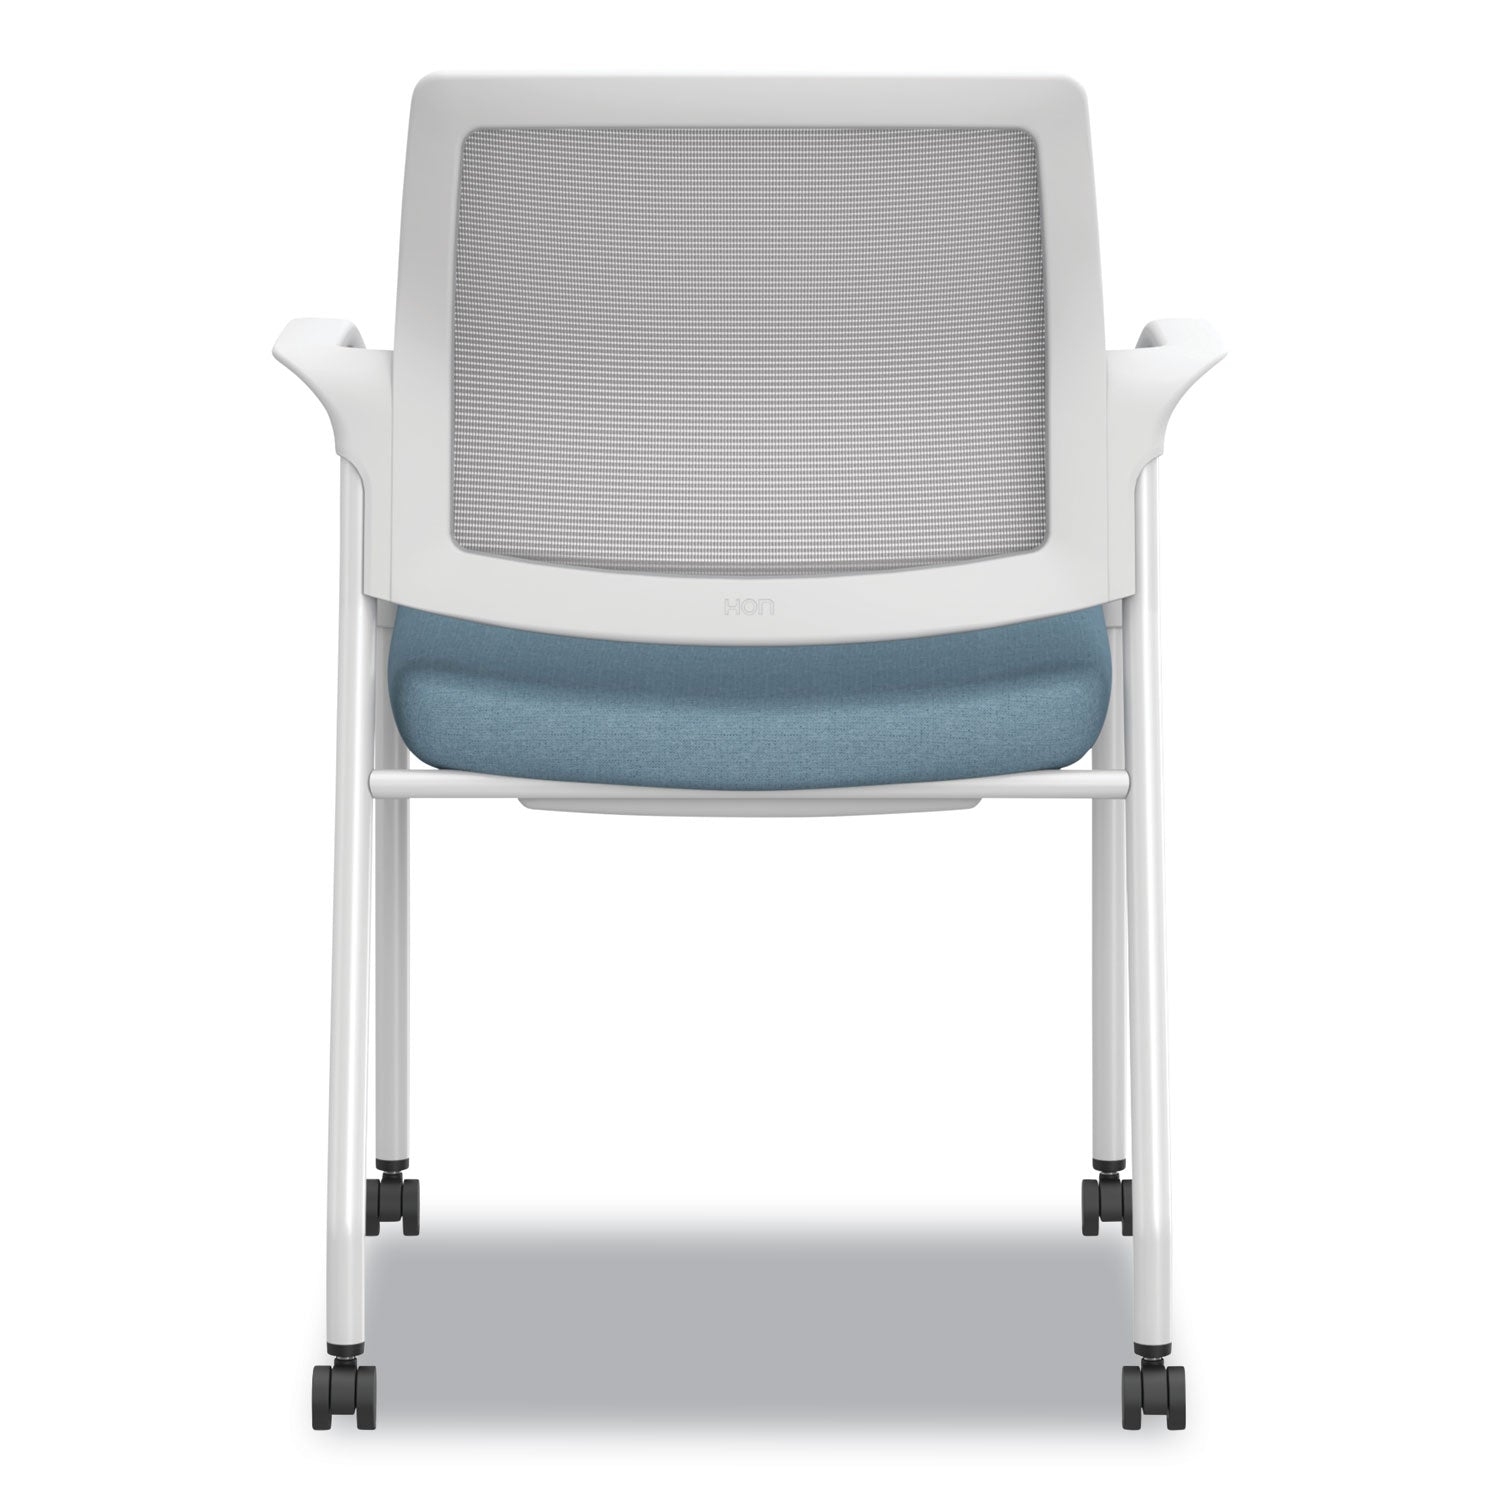 ignition-series-mesh-back-mobile-stacking-chair-fabric-seat-25-x-2175-x-335-carolina-fog-white-ships-in-7-10-bus-days_honi2s6fhfl21k7 - 3